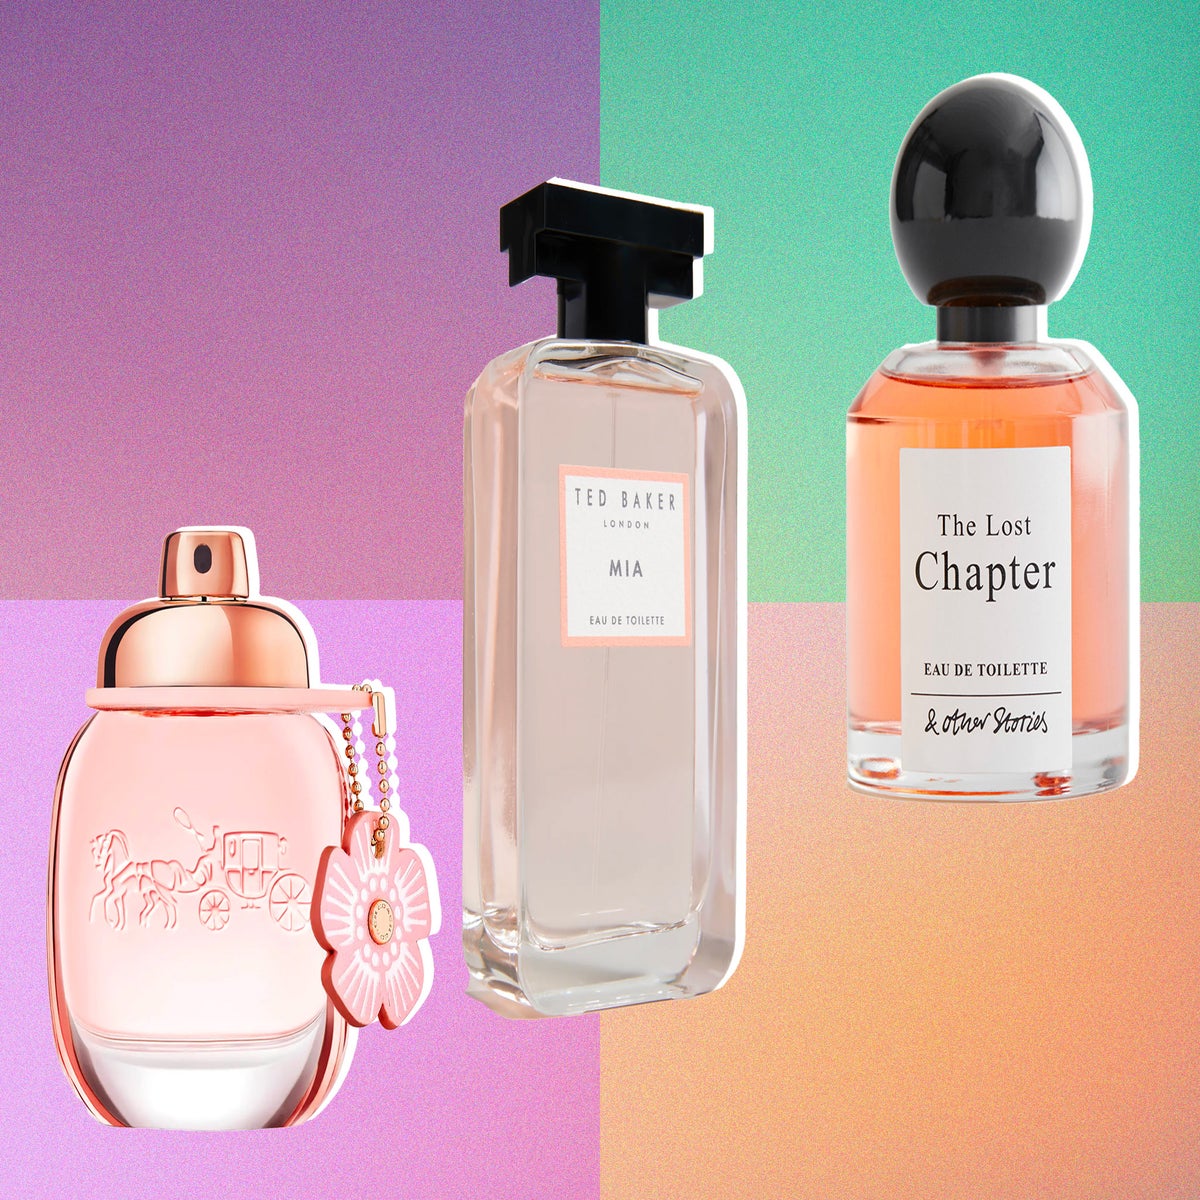 12 Best Vanilla Perfumes to Spritz on for Special Occasions